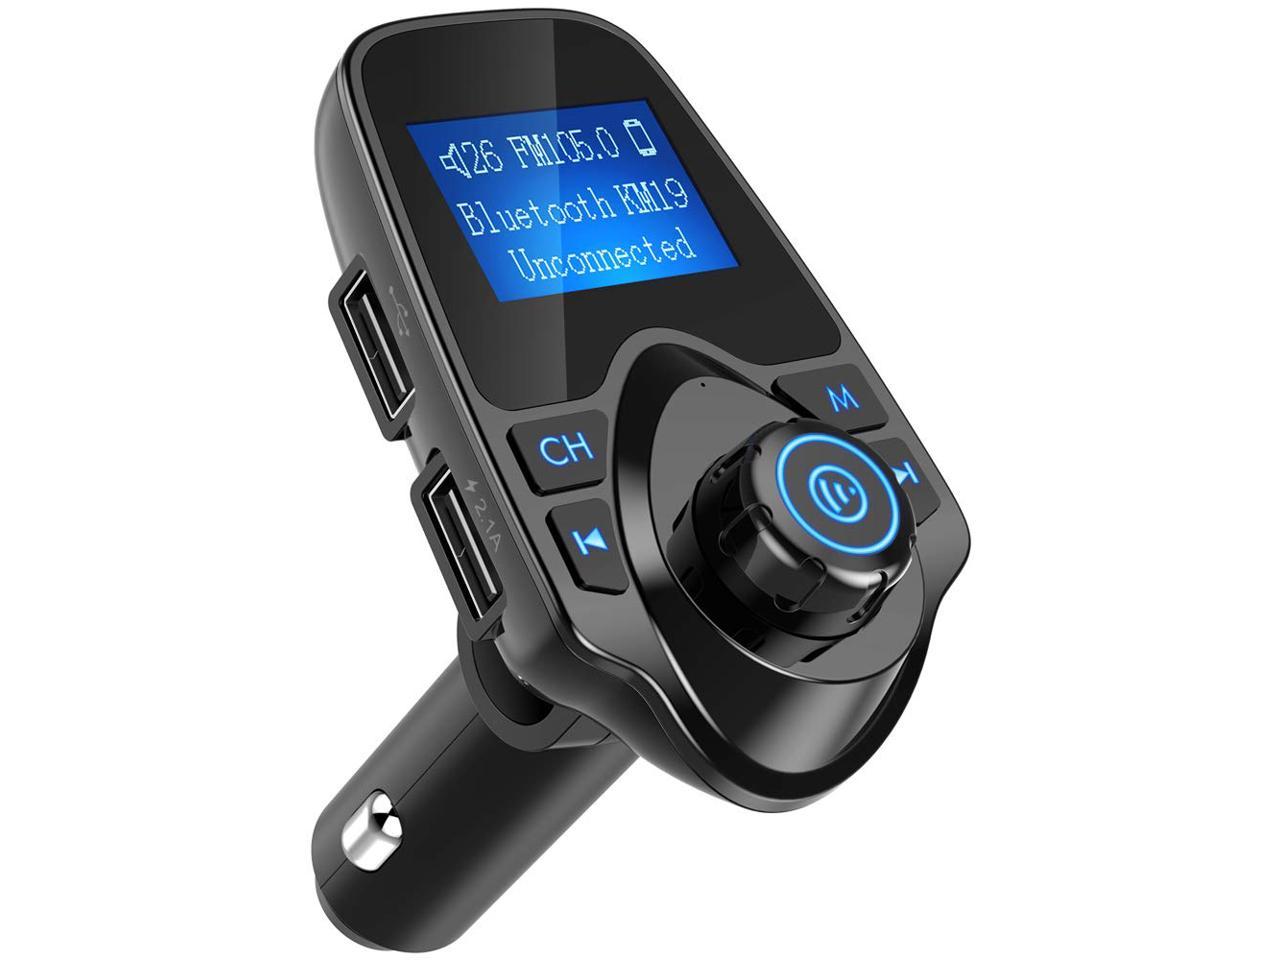 iN TECH FM Transmitter Car Handsfree Kit Bluetooth FM Wireless Radio Transmitter for Music and Phone Calls Dual USB Plugs for Easy Charging of Devices